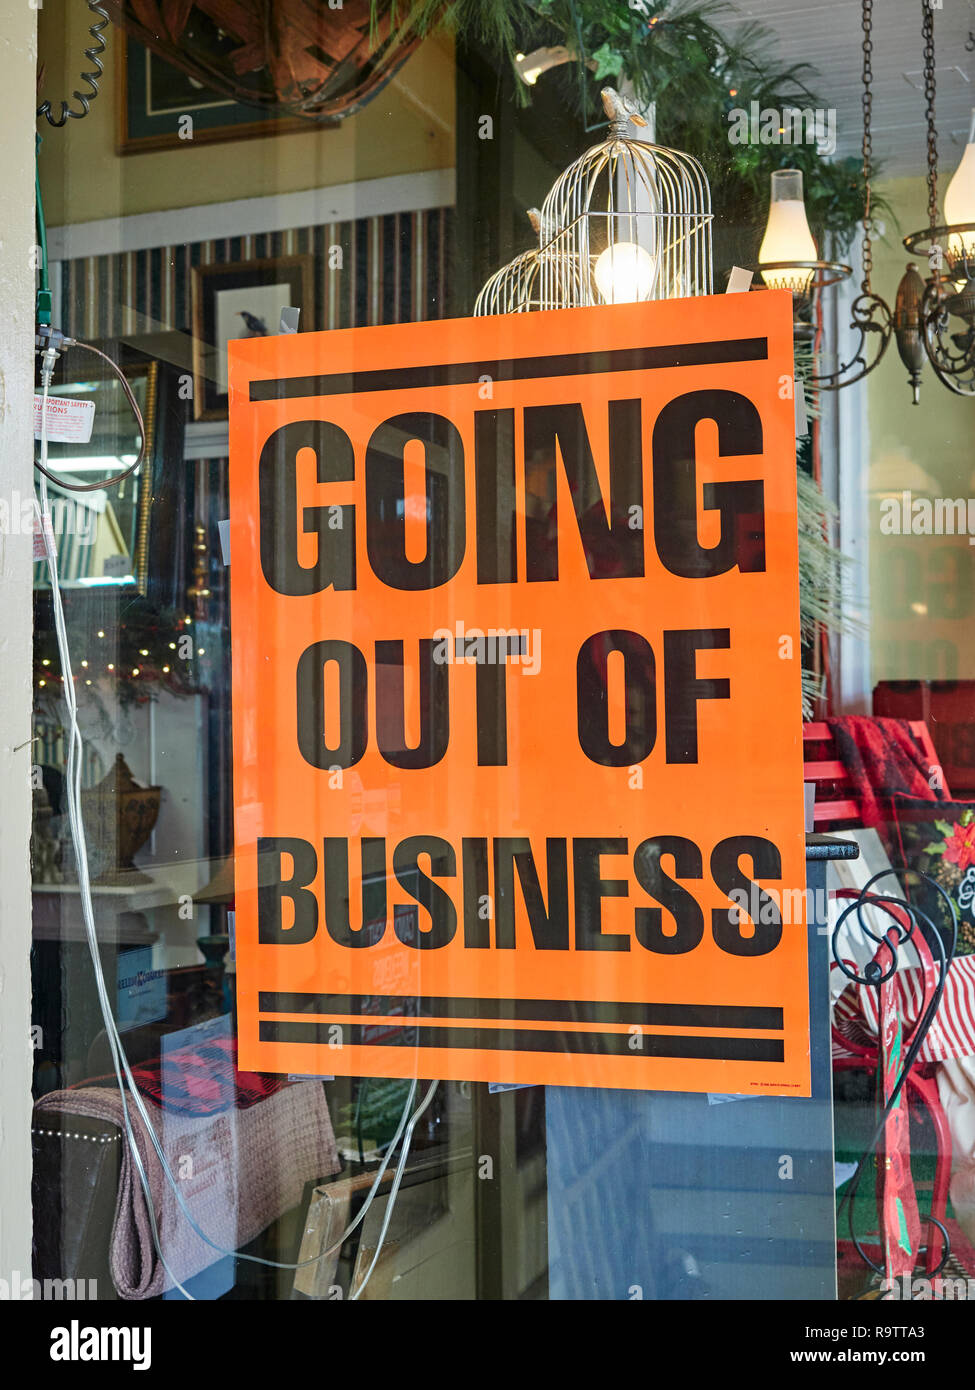 Going Out of Business sign in the window of a small store or storefront